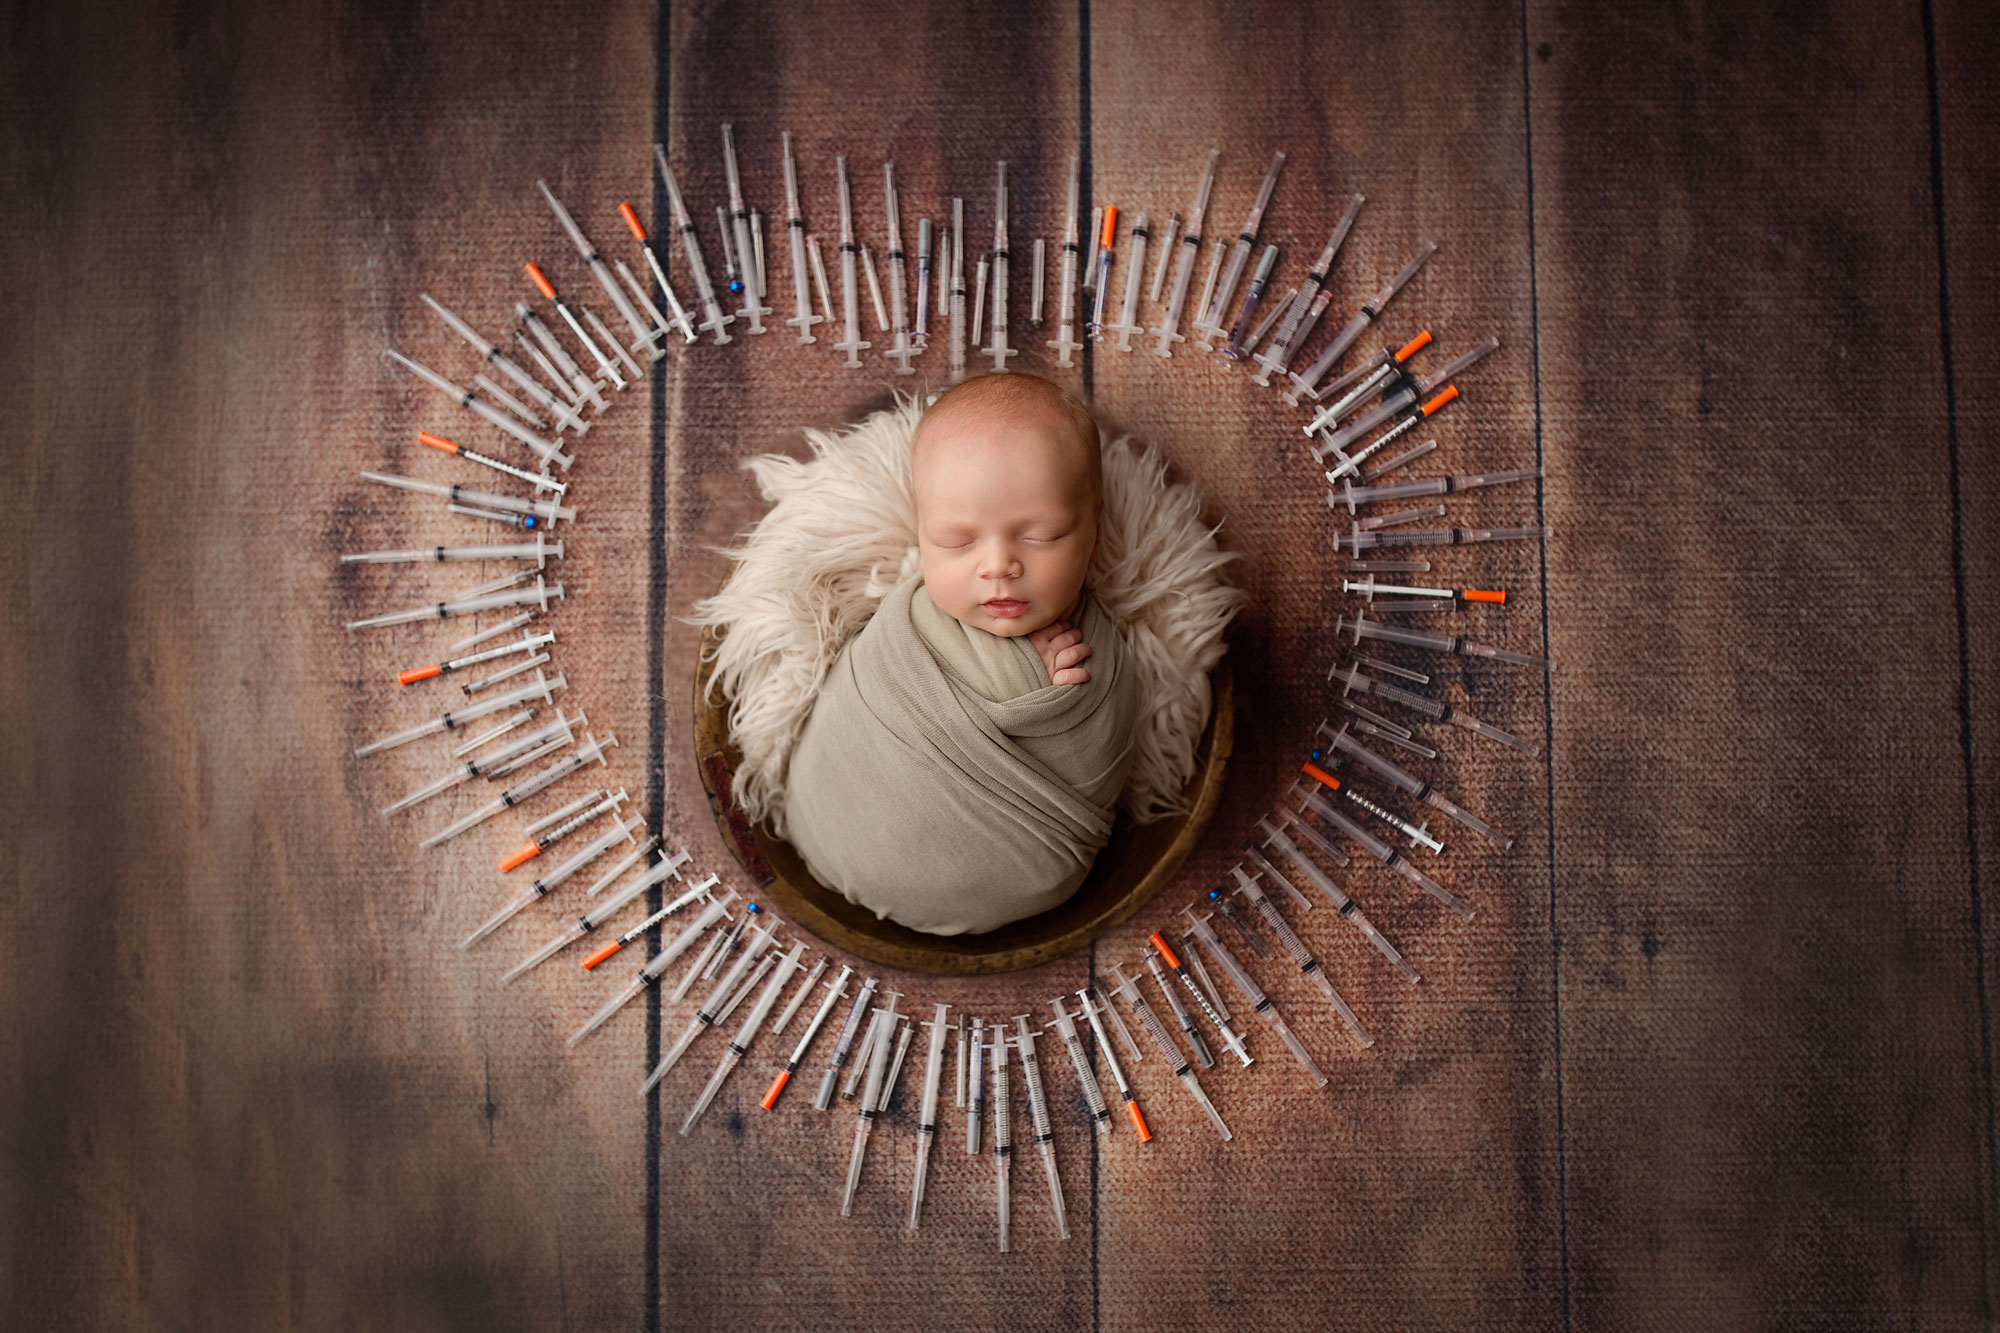 IVF newborn photo ideas for photography session